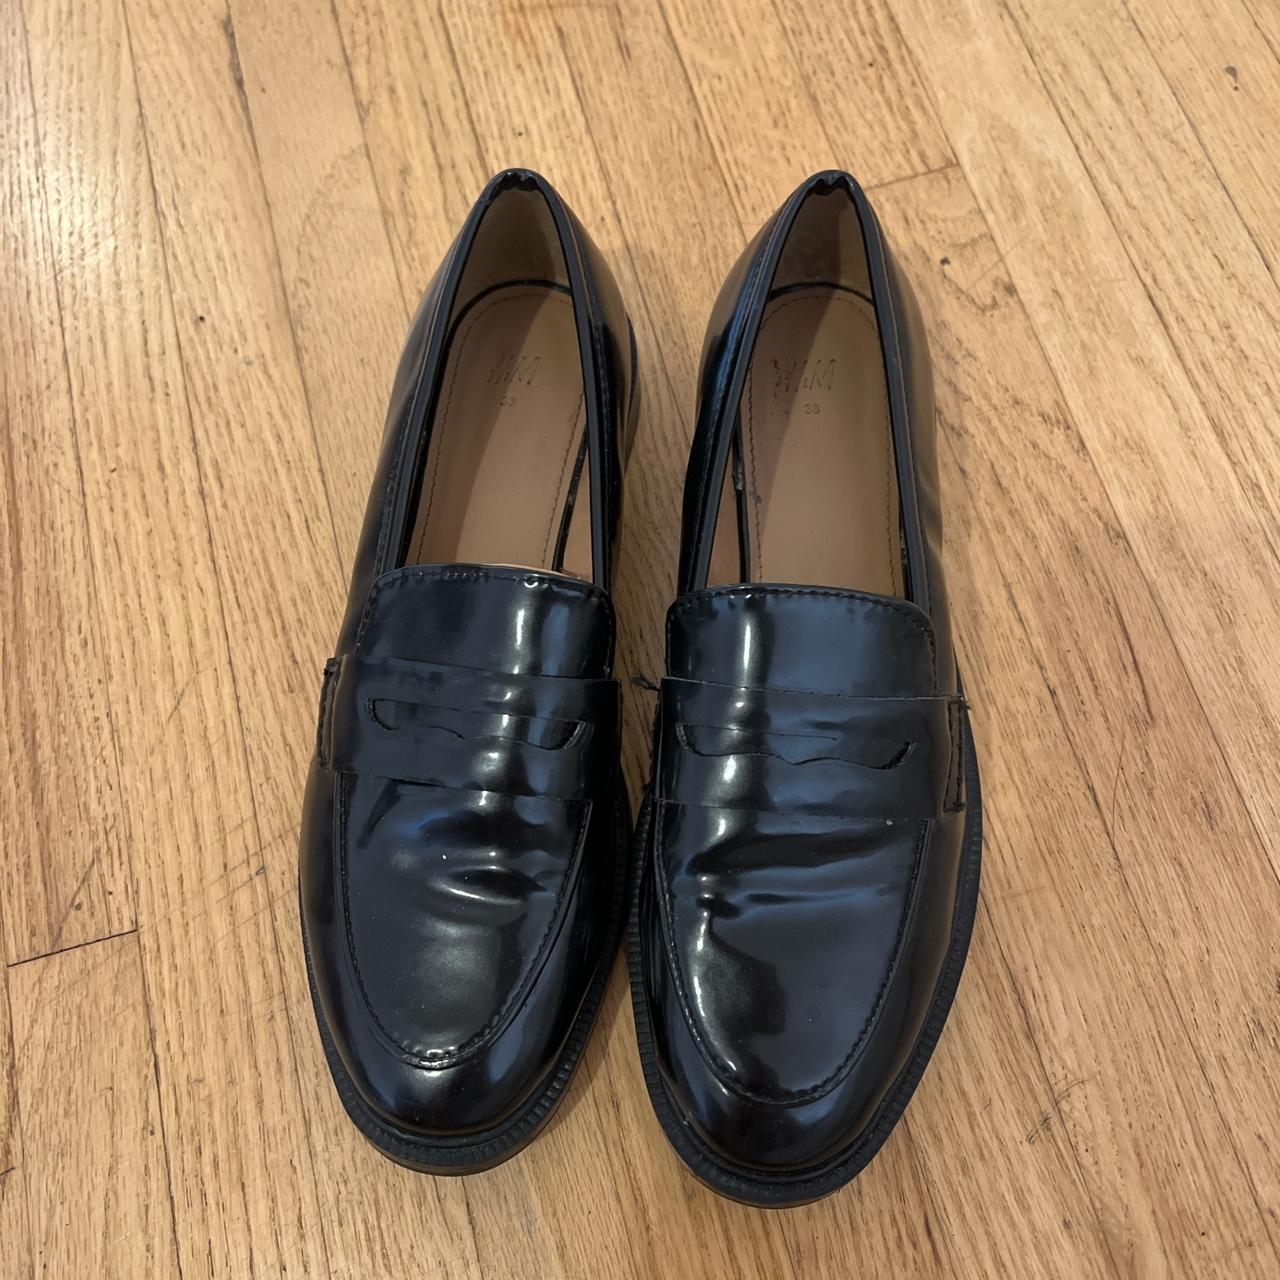 Black faux leather loafers - Depop